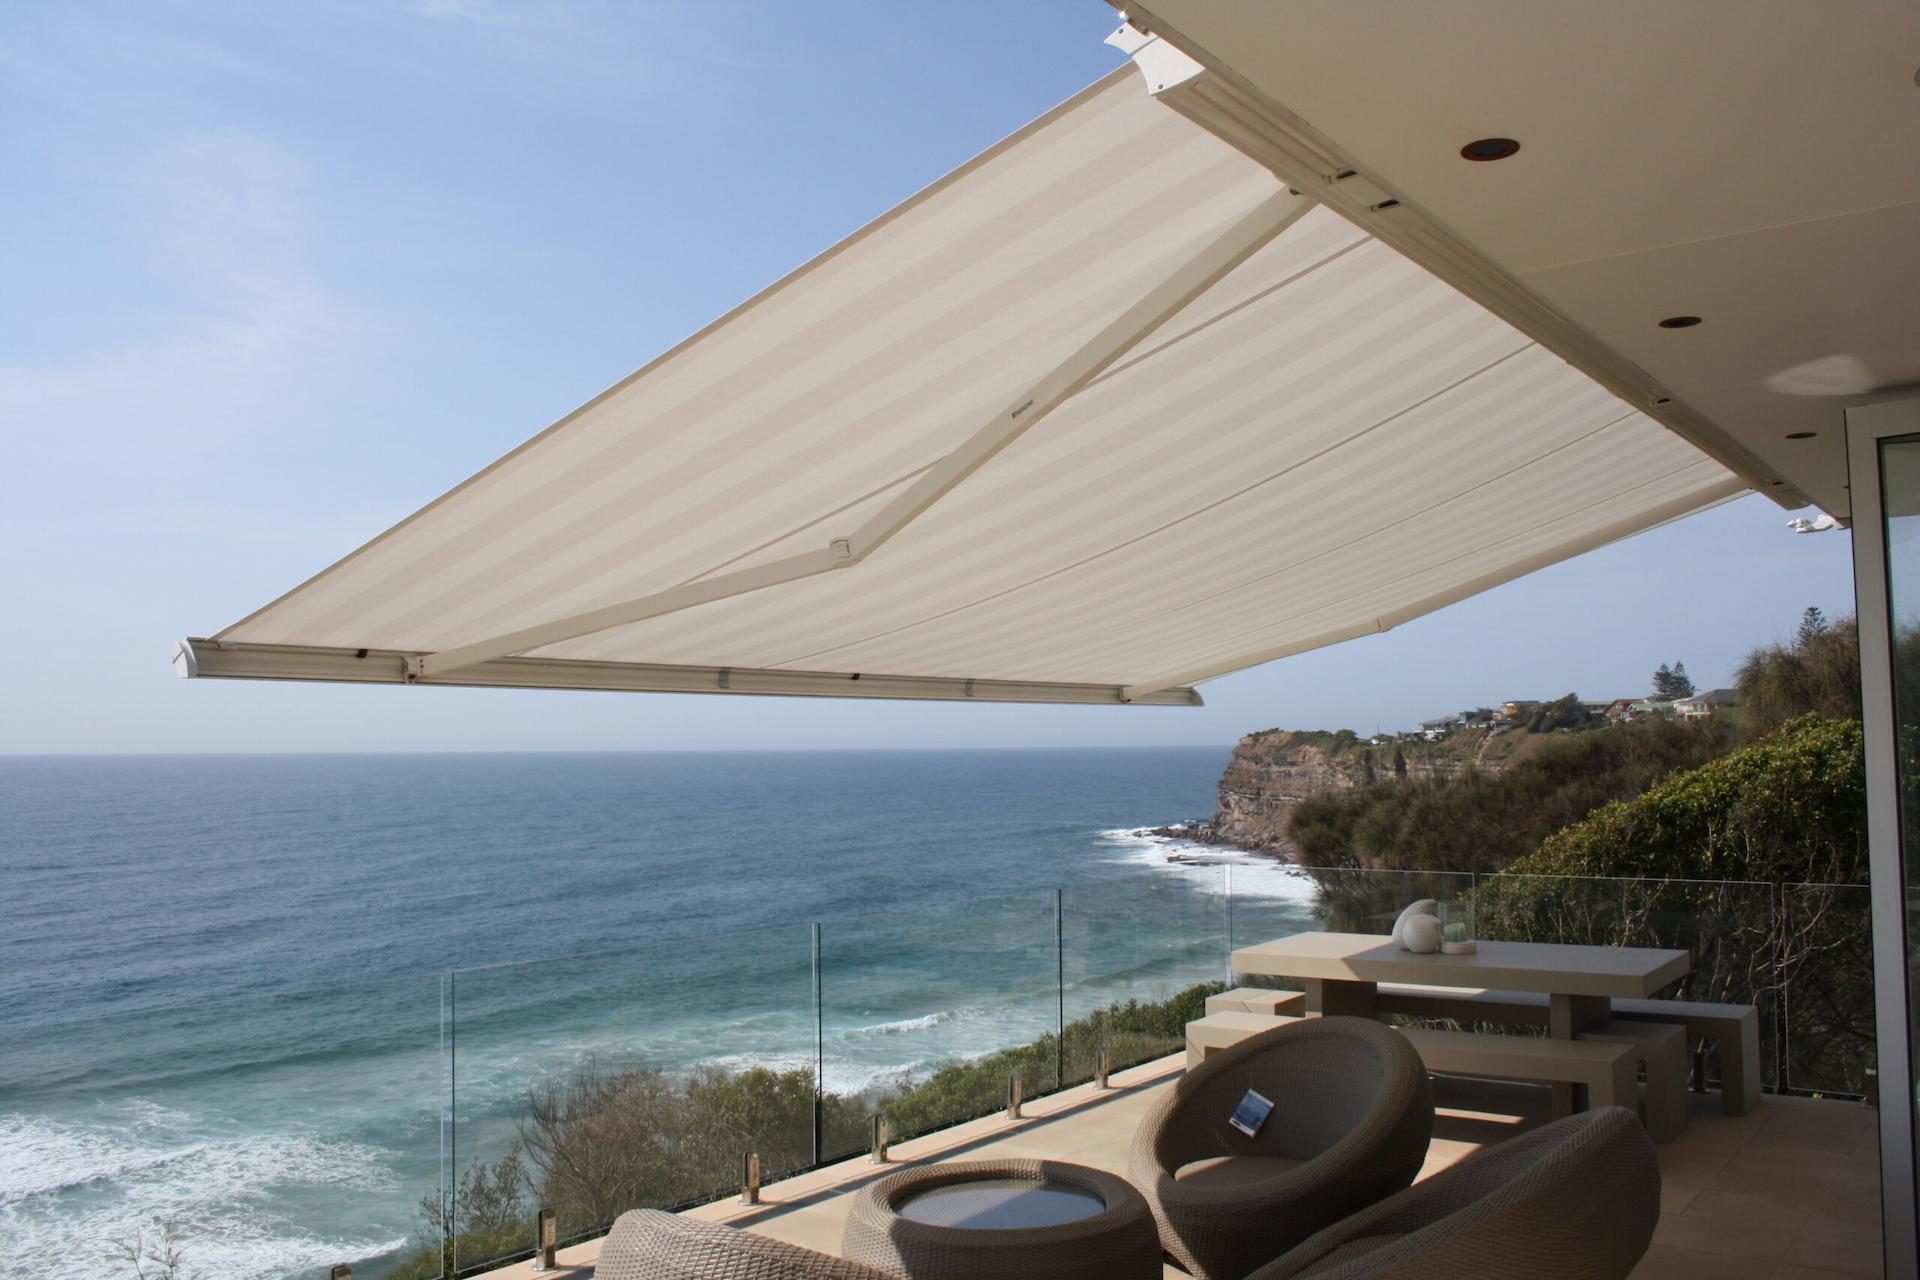 Regal Awnings: The Pinnacle of Outdoor Comfort with Retractable Awnings